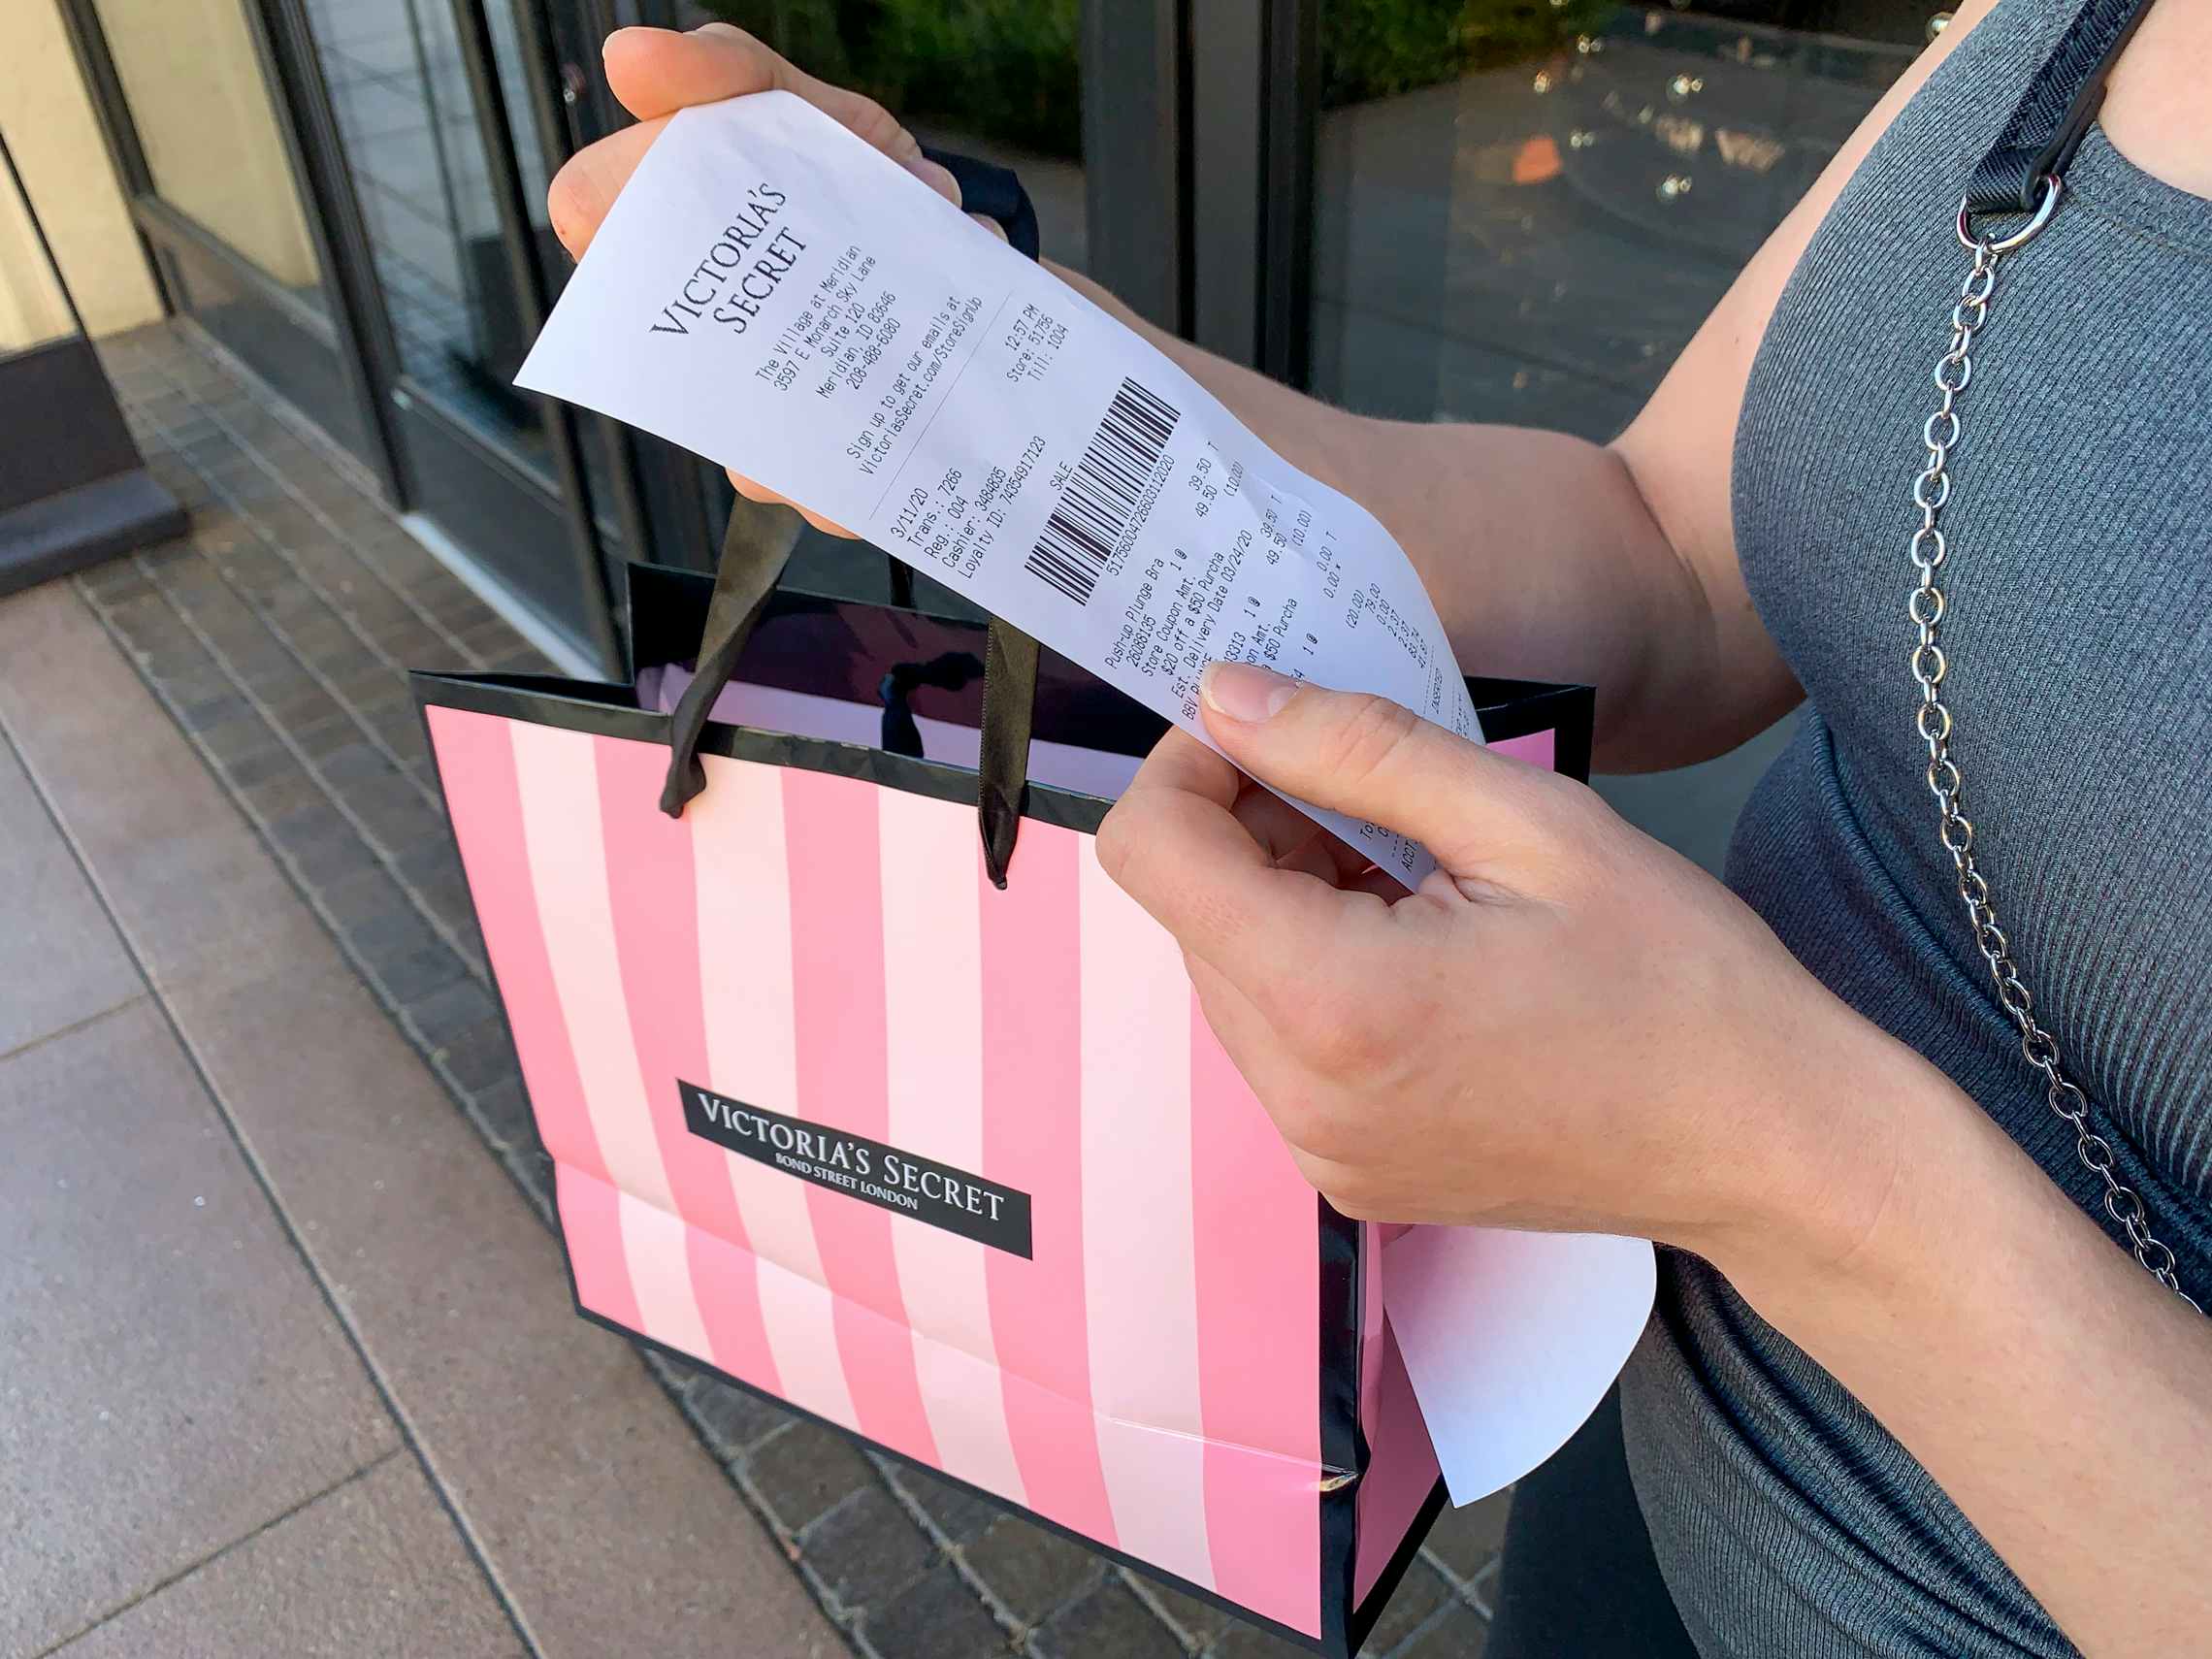 Woman looking at a Victoria's Secret receipt with shopping bag in hand.